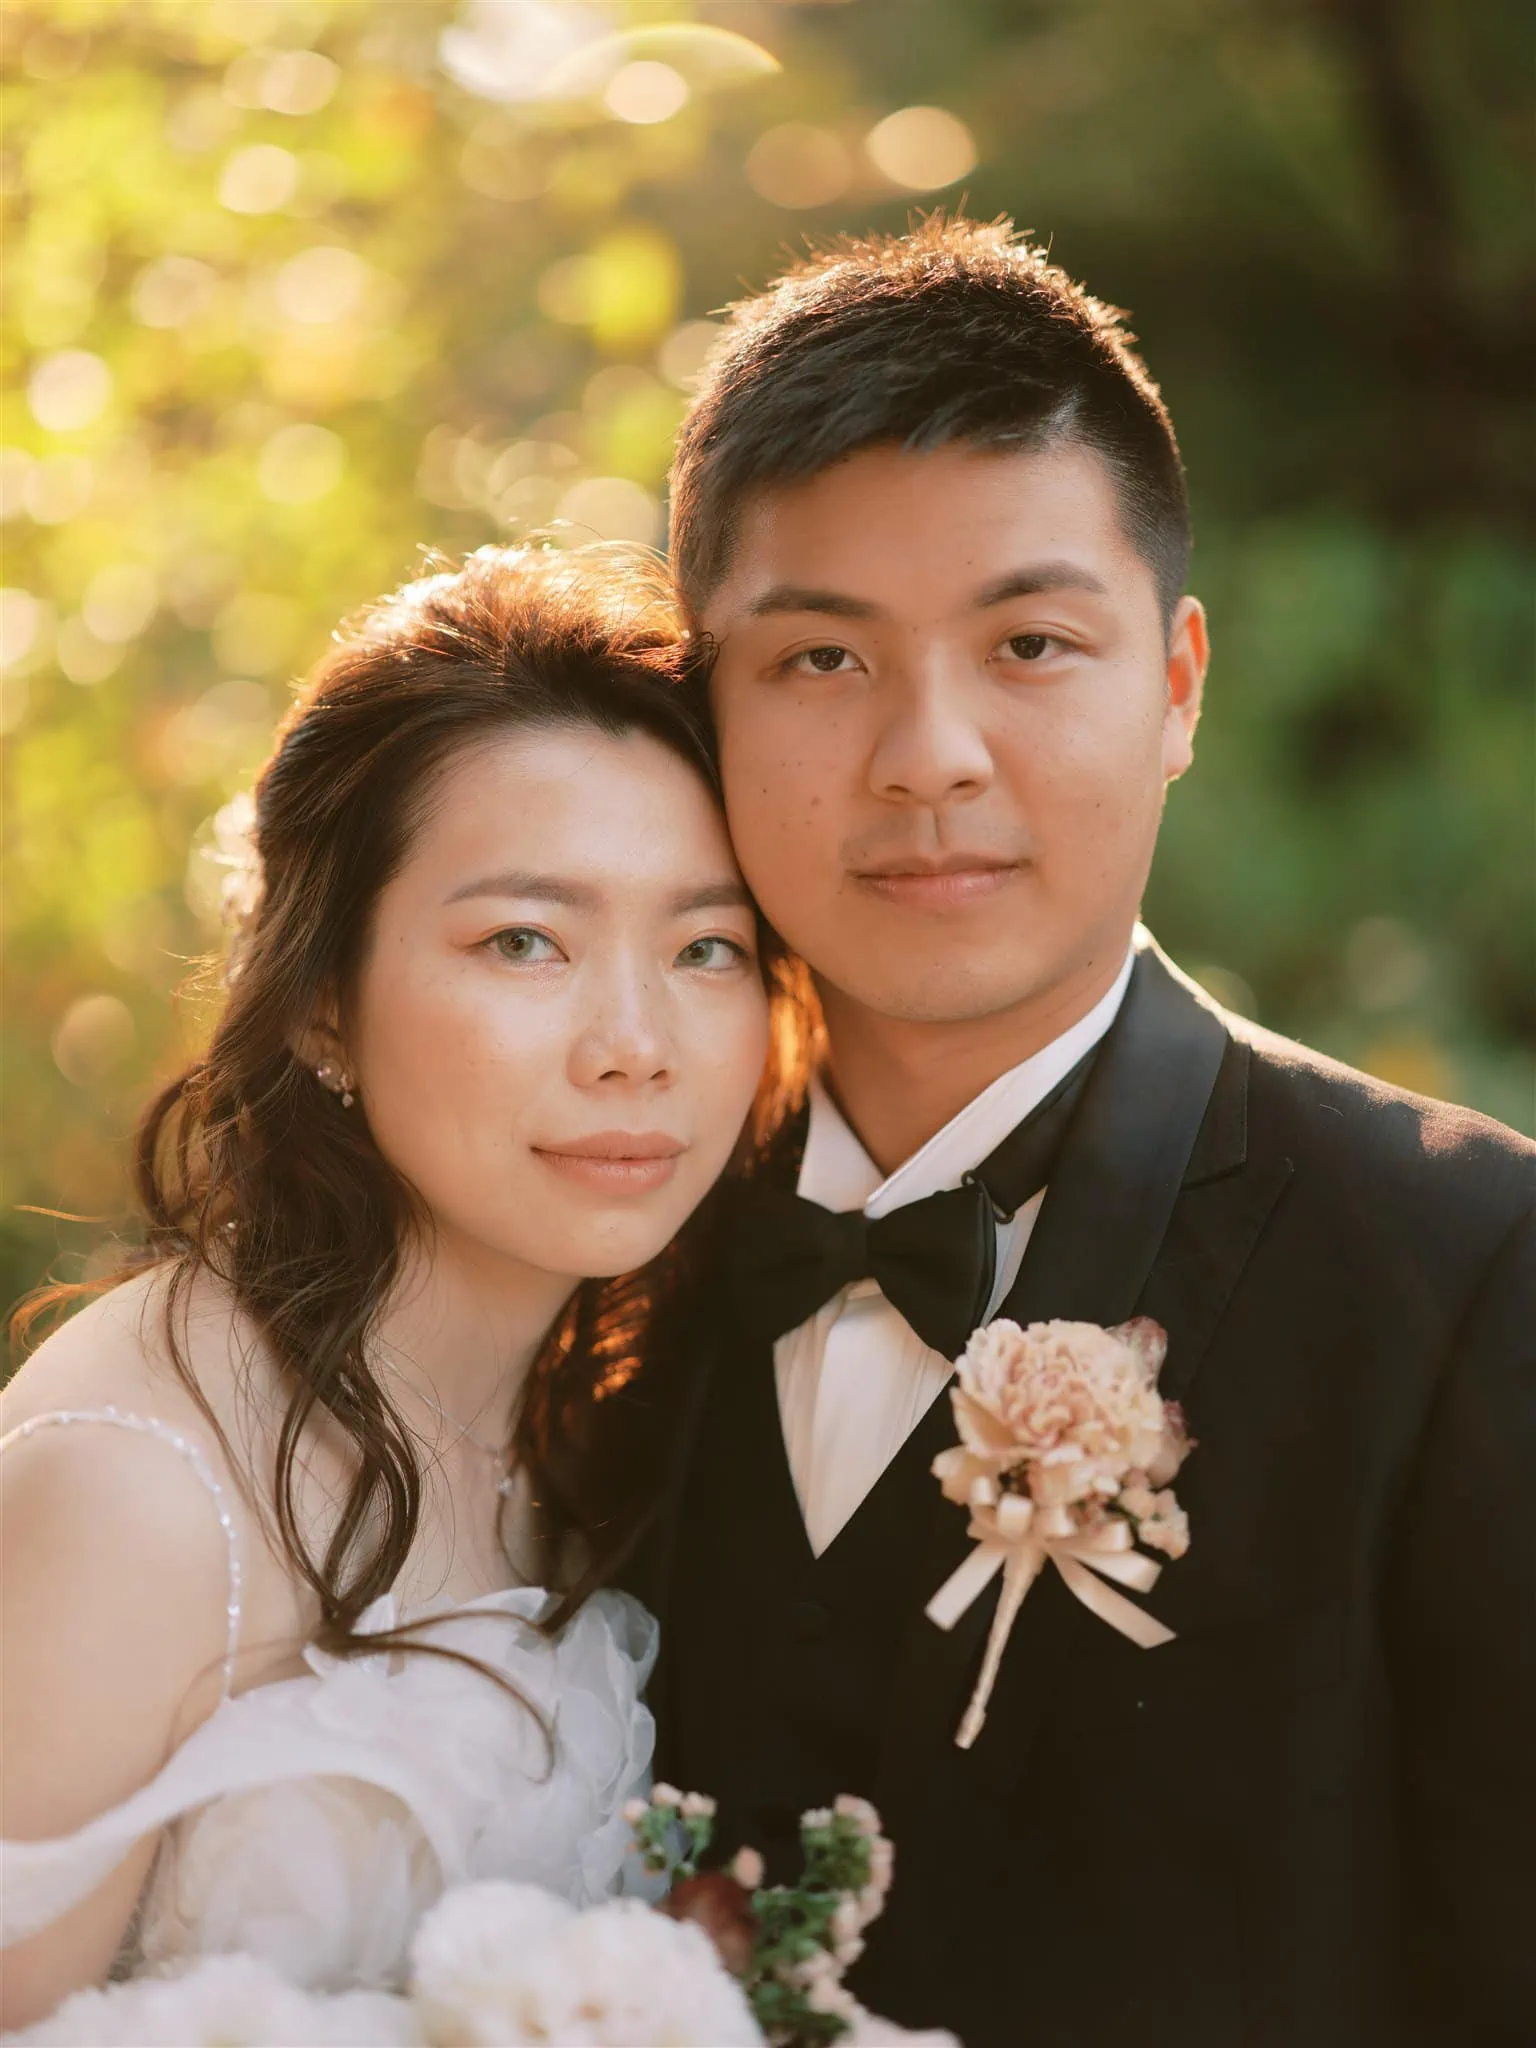 Kyoto Tokyo Japan Elopement Wedding Photographer, Planner & Videographer | Description (modified): A bride and groom capturing their special moment in the woods with the help of a Japan elopement photographer.